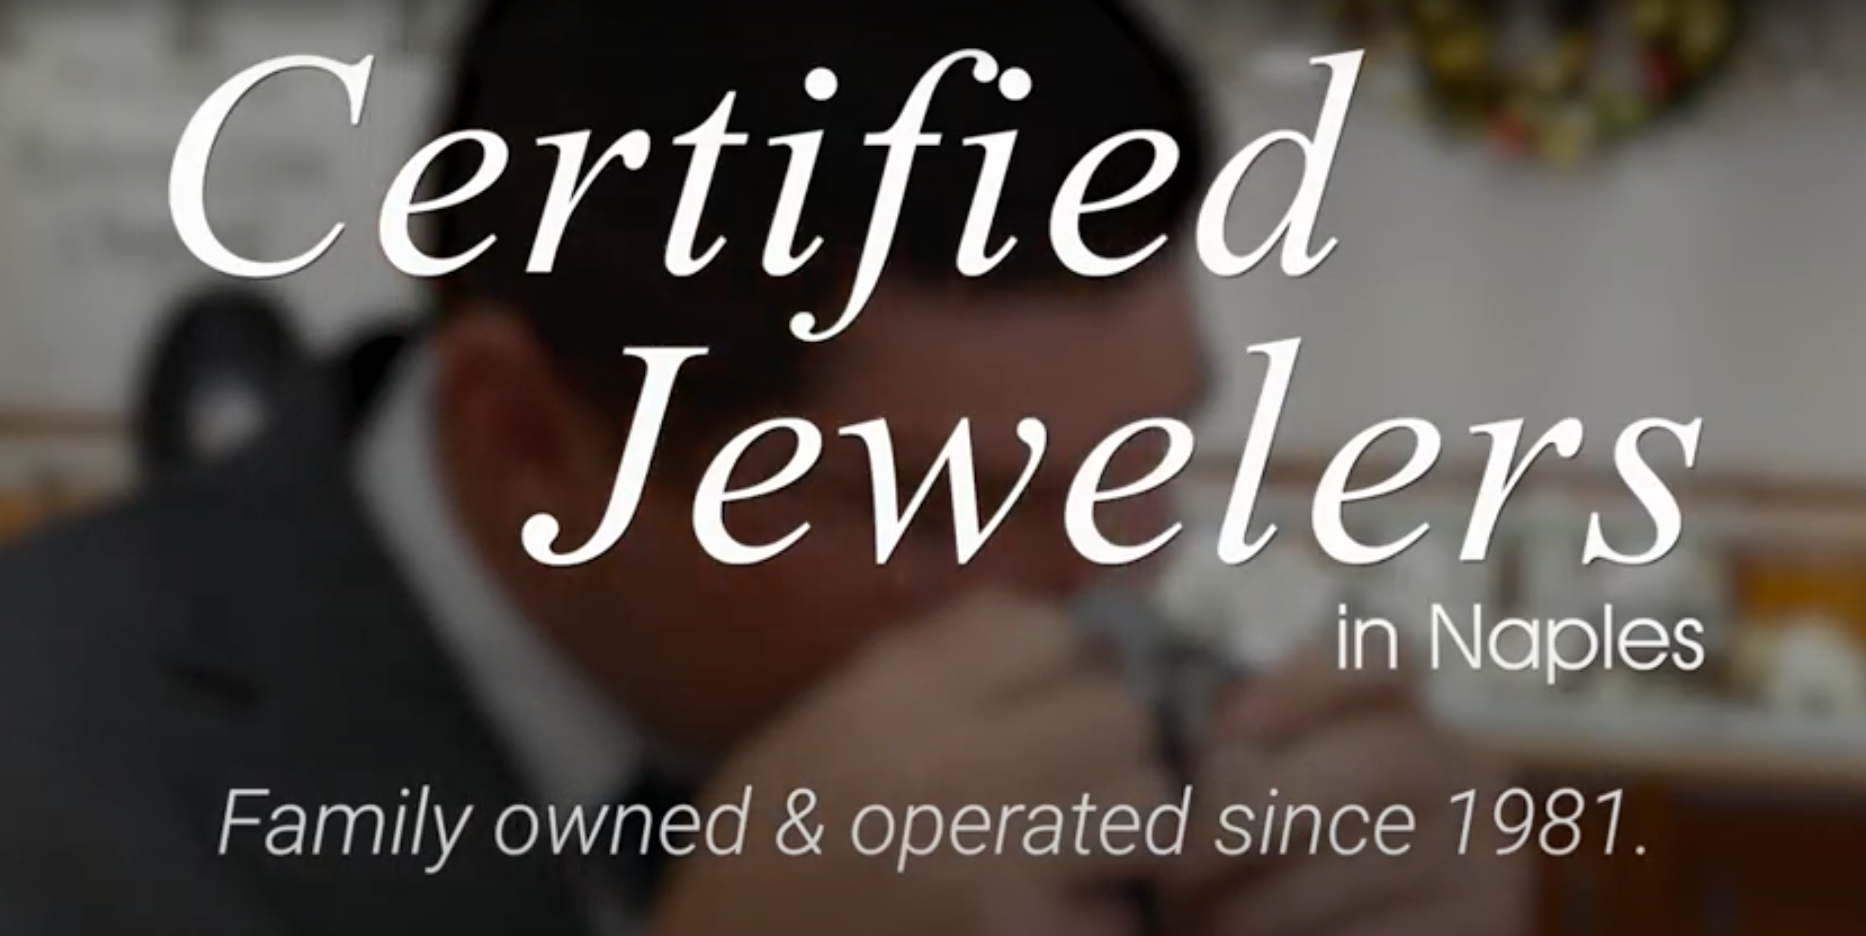 Load video: Certified Jewelers family owned for over 40 years